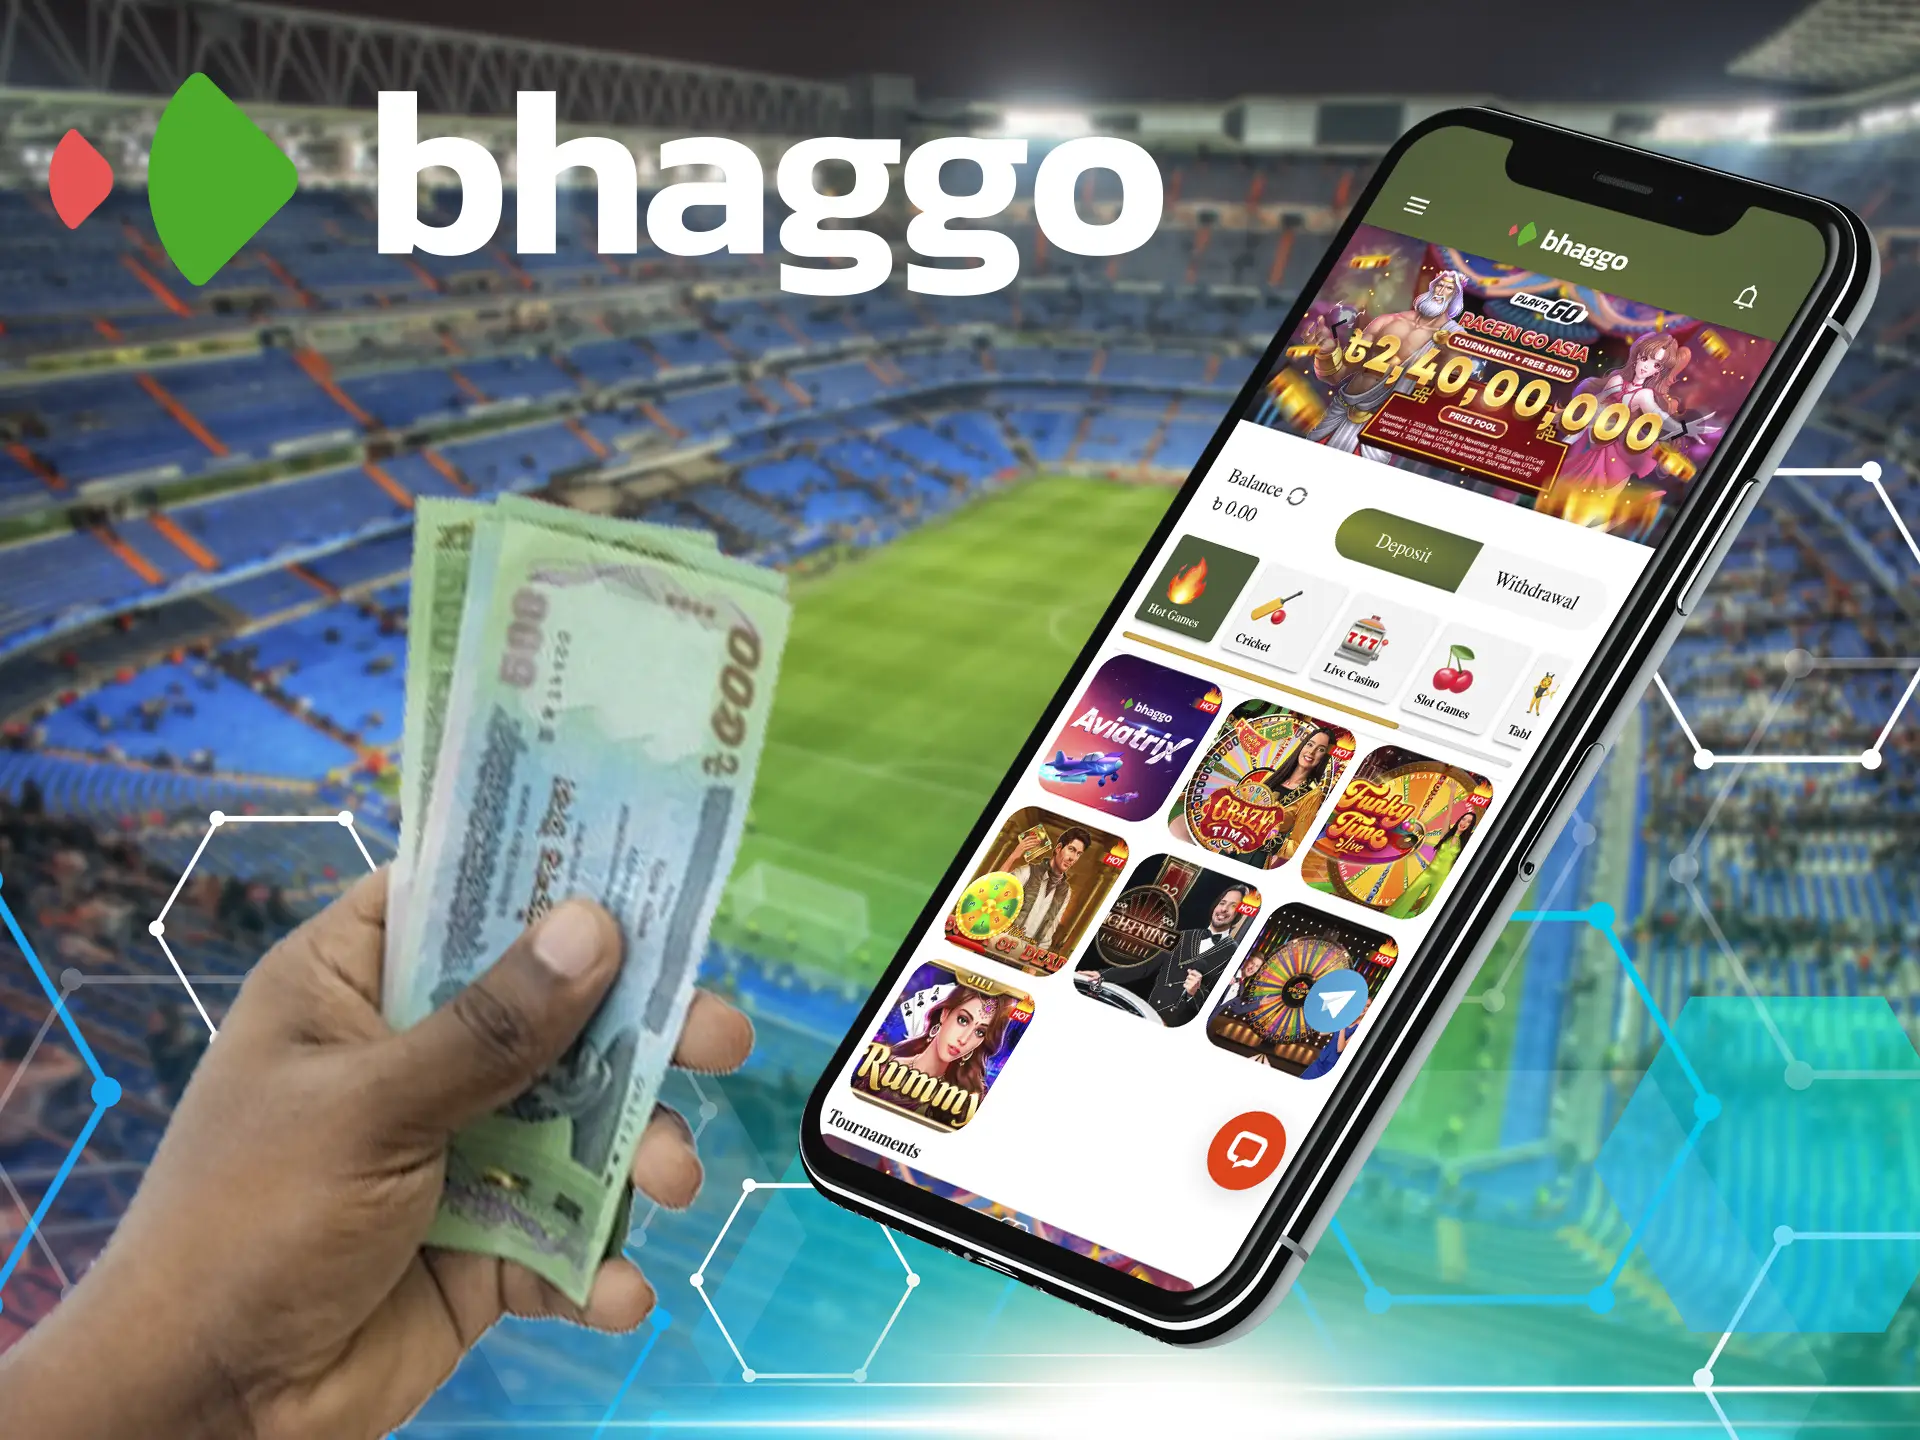 If you have won money in Bhaggo and do not know how to get it - then our article will help you.